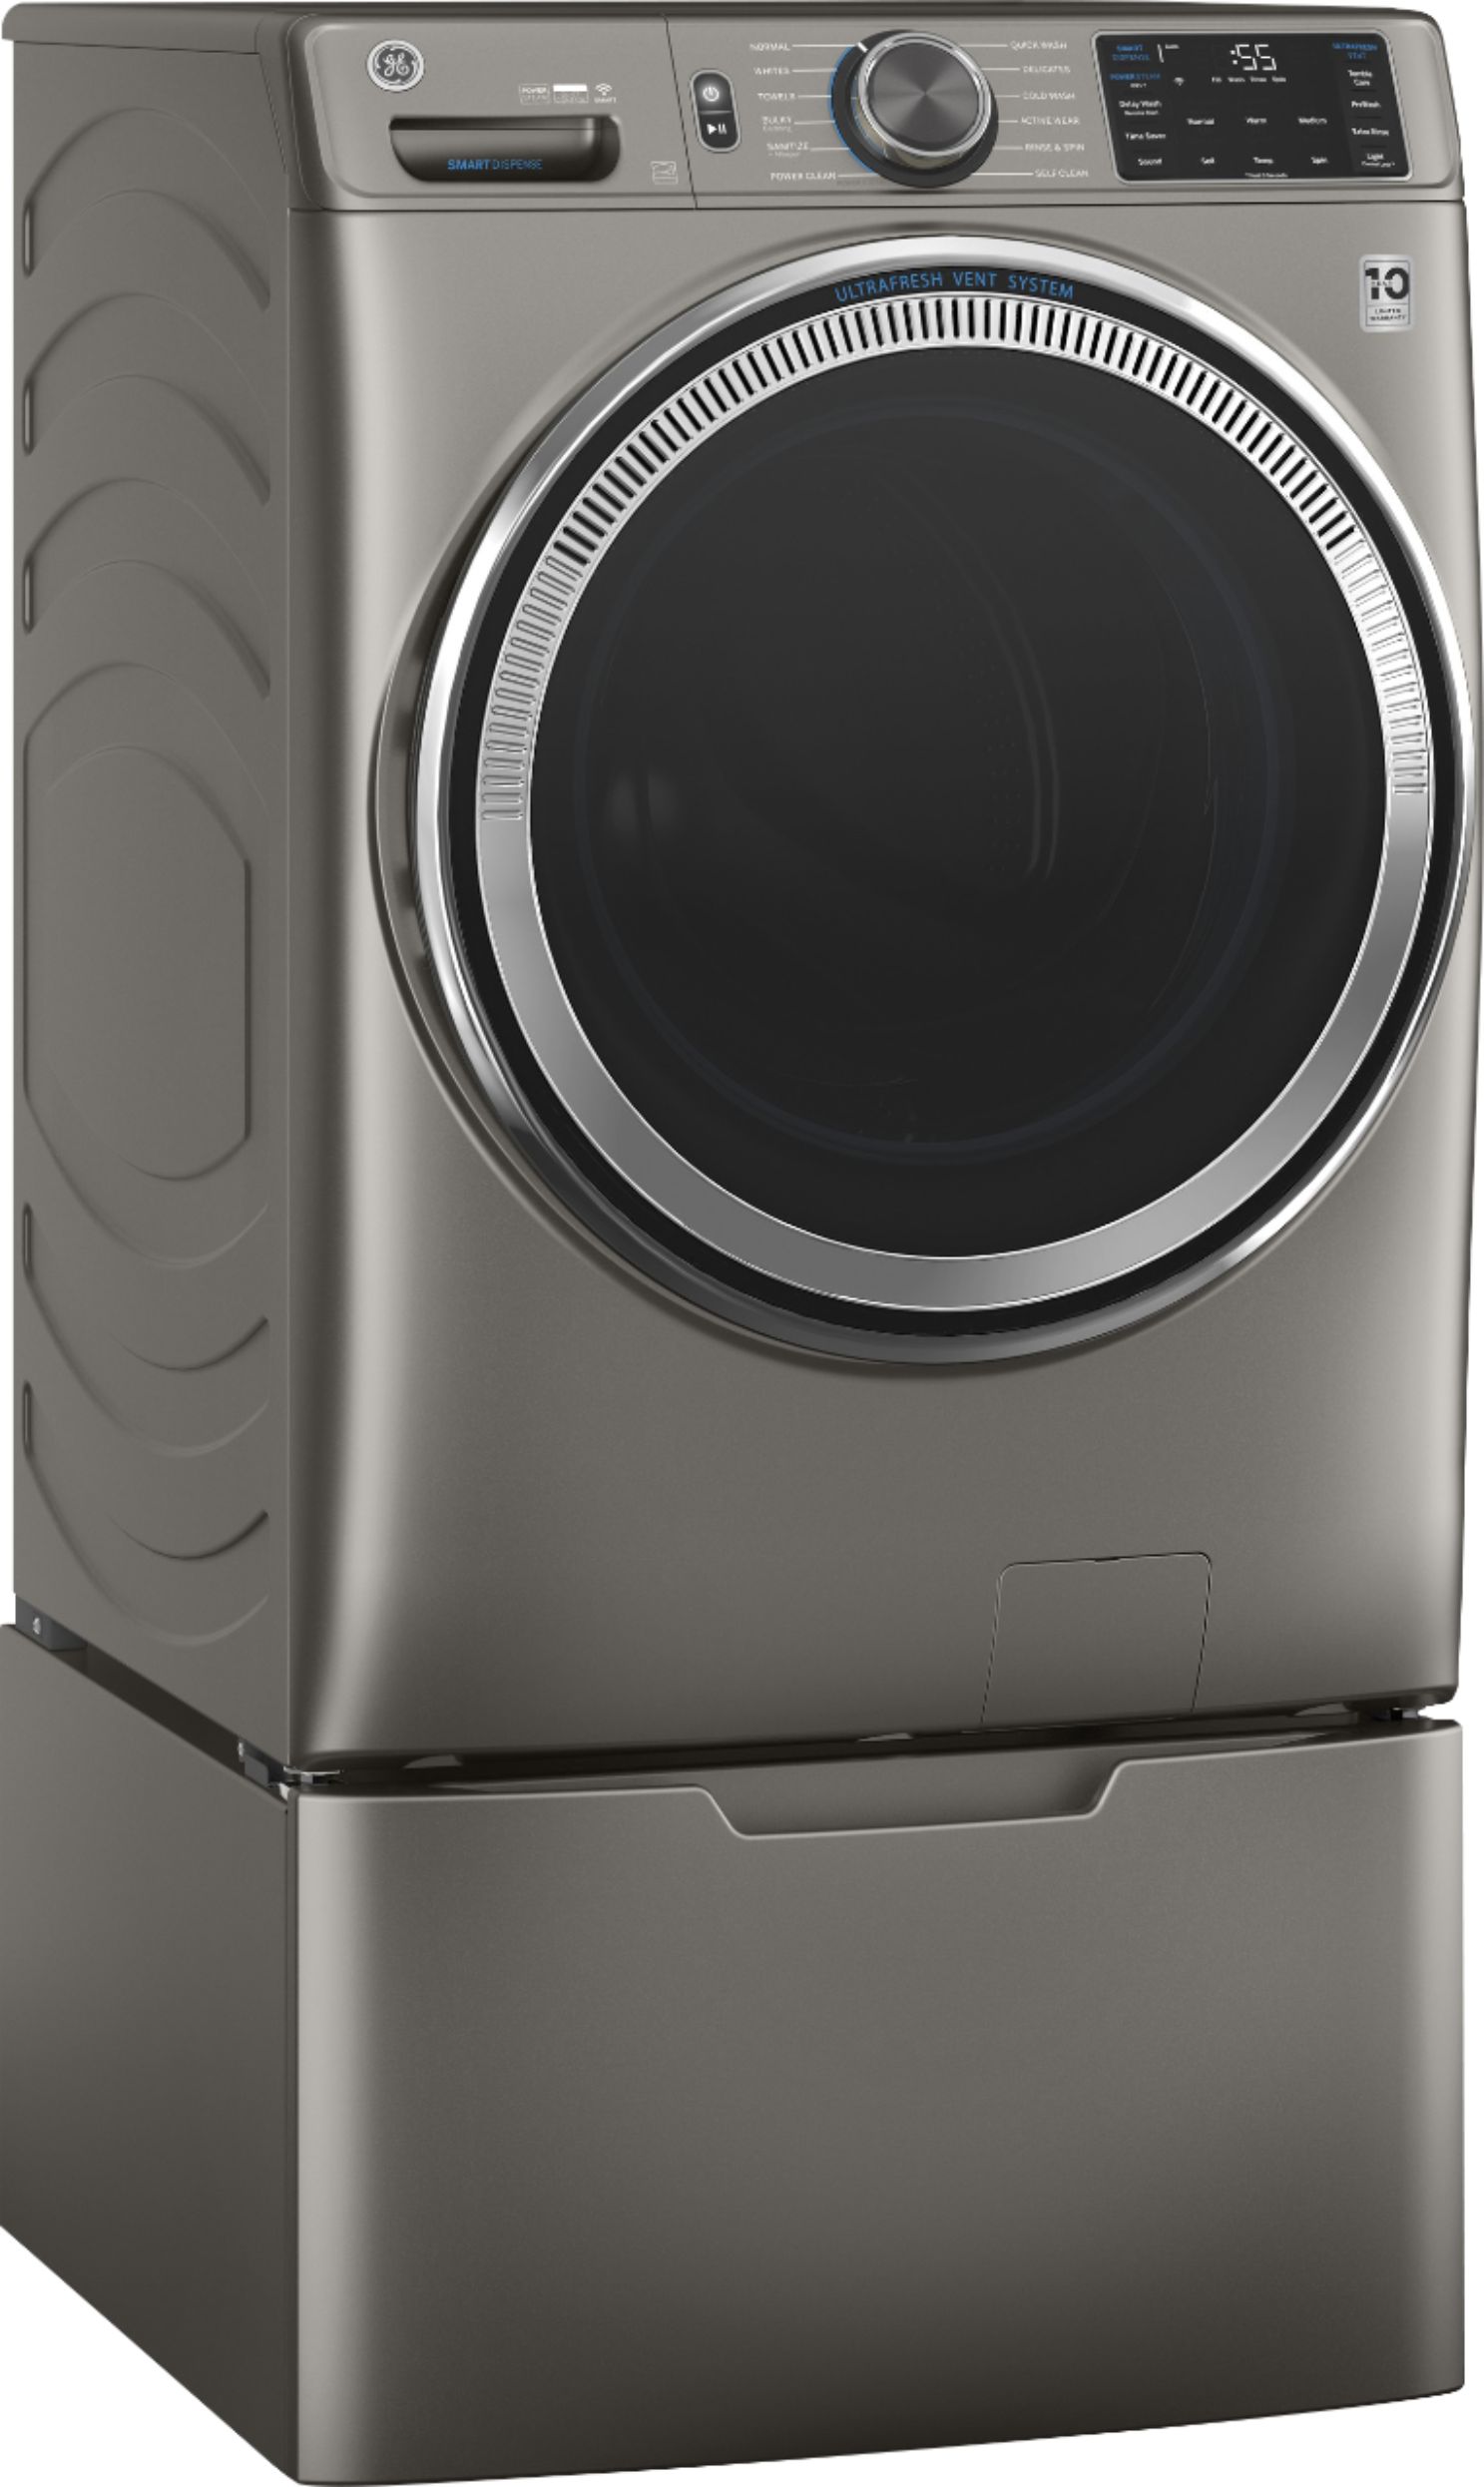 Angle View: GE - 5.0 Cu. Ft. High-Efficiency Front Load Washer with UltraFresh Vent System - Diamond gray